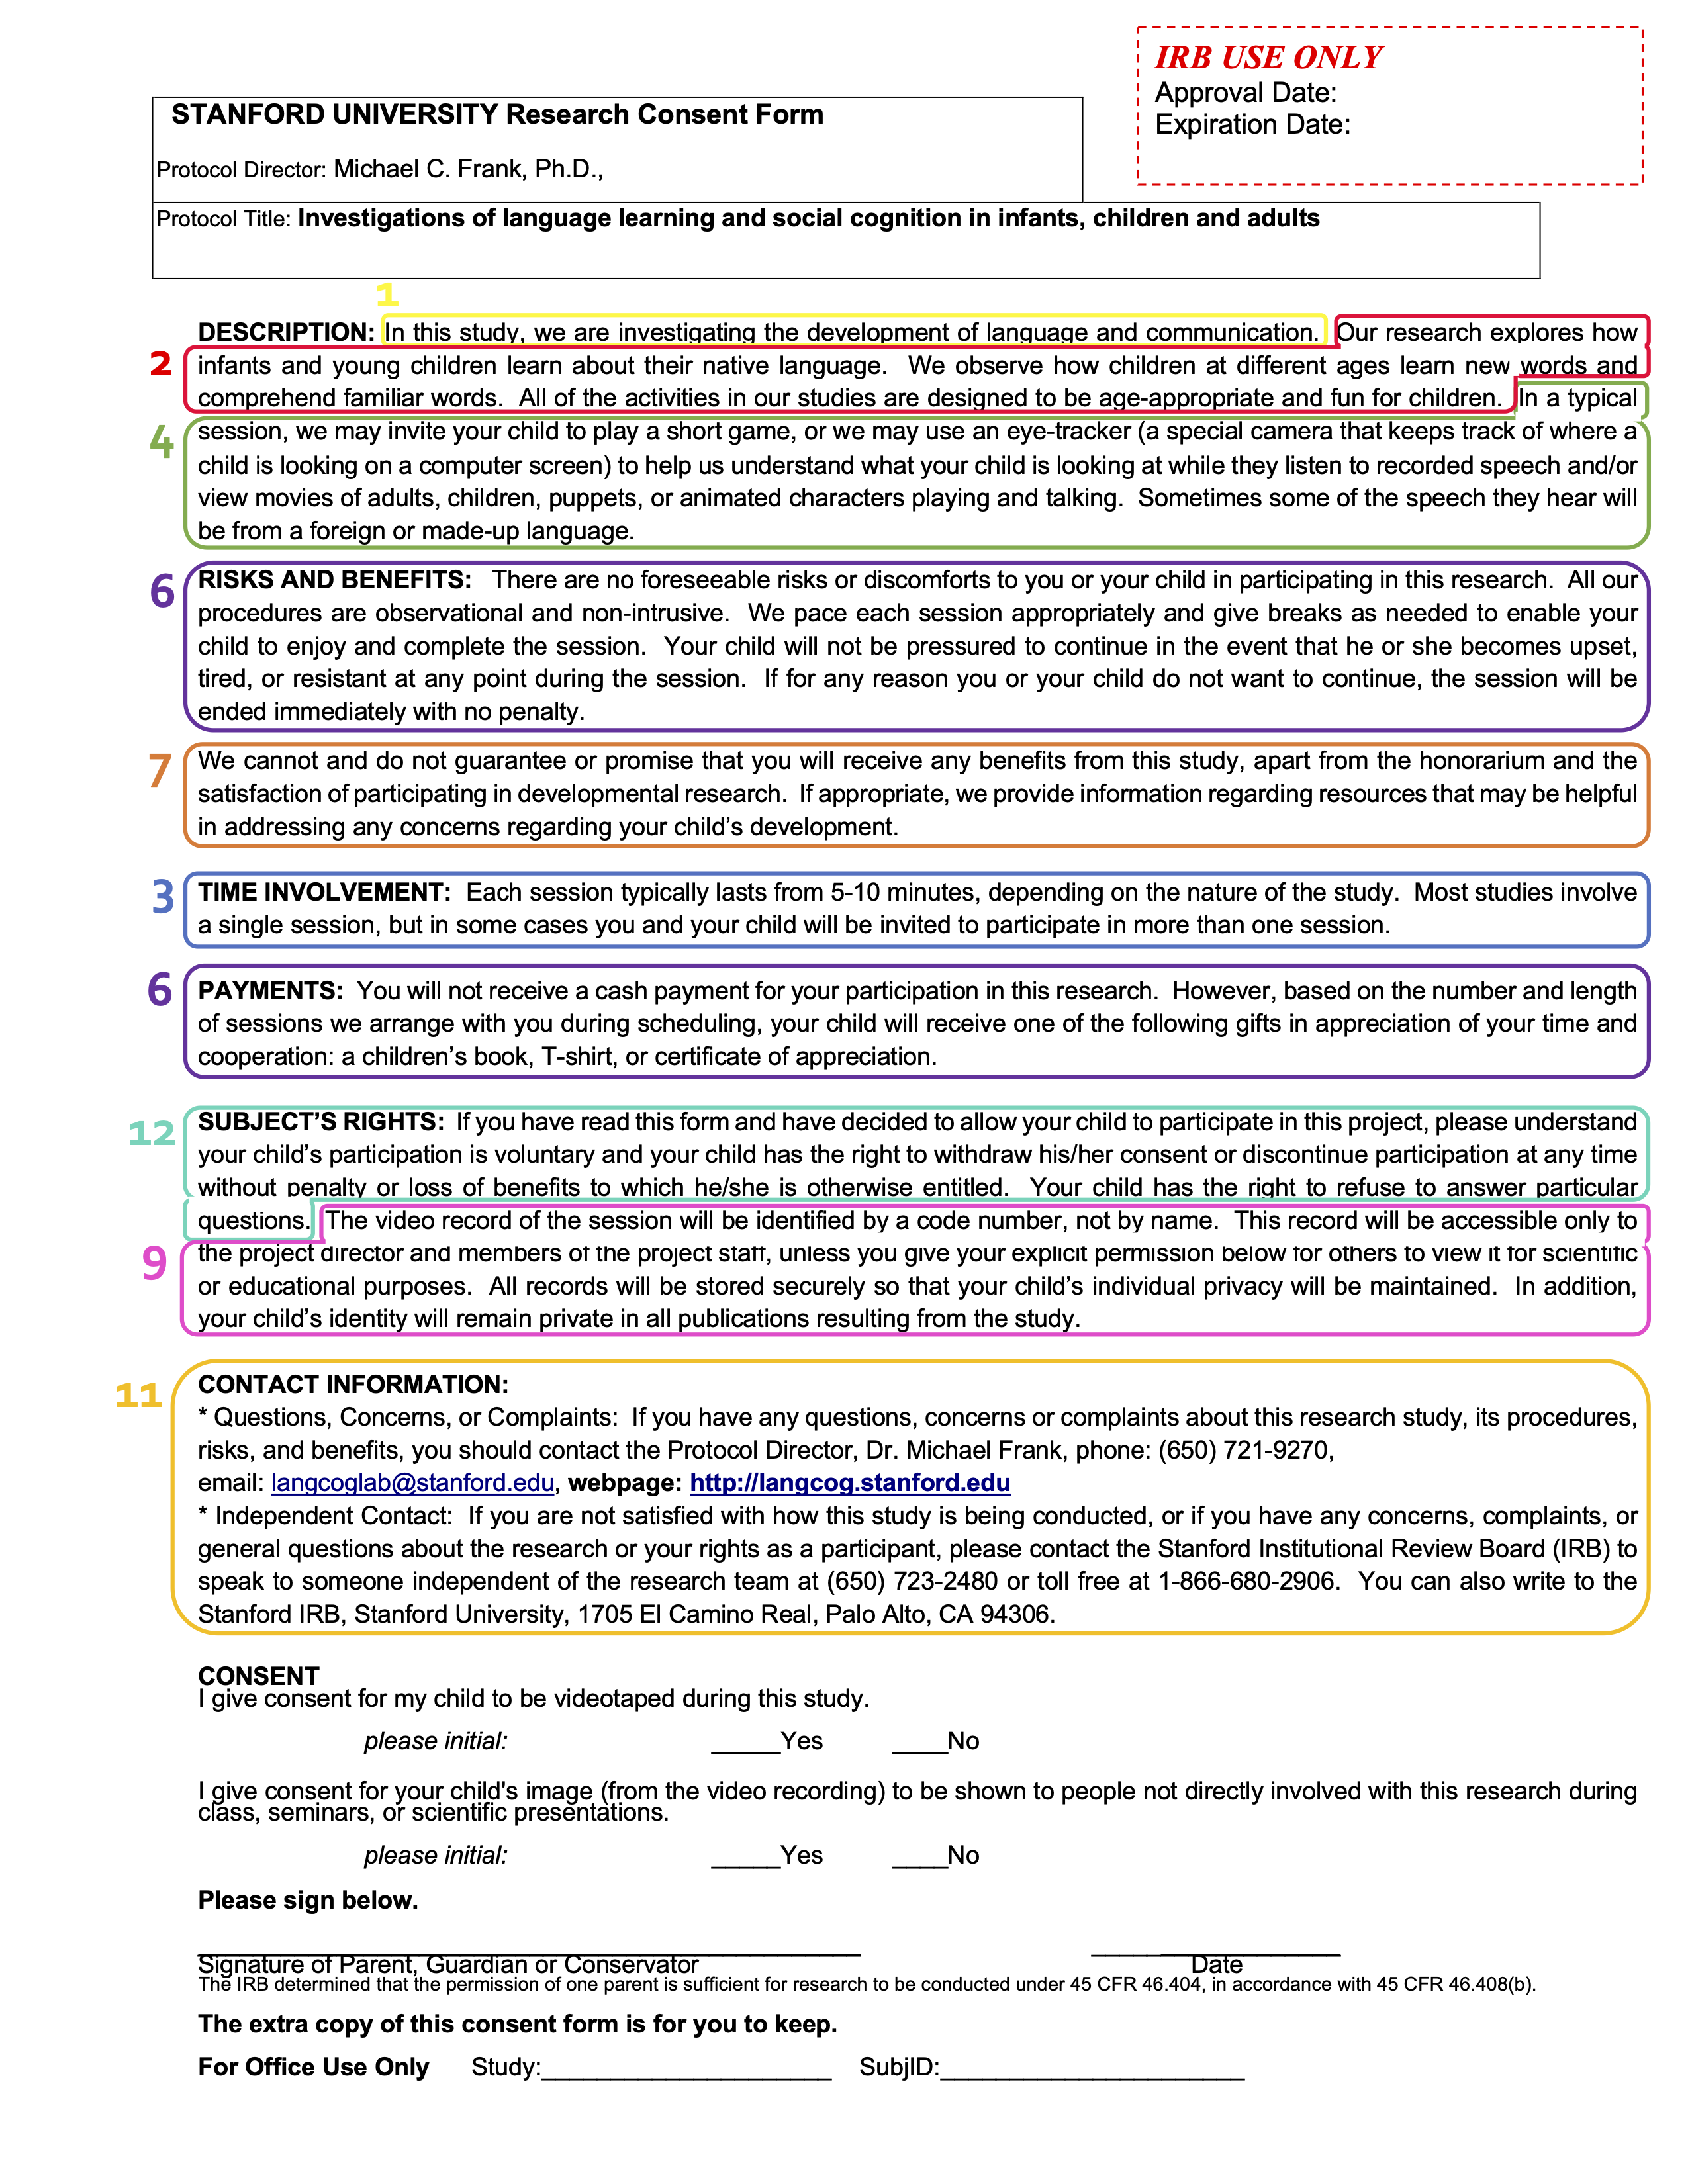 Consent form annotated to show how specific text fulfills the requirements in Table 12.1. Categories 5, 8, and 10 were not required for this minimal risk psychology experiment.